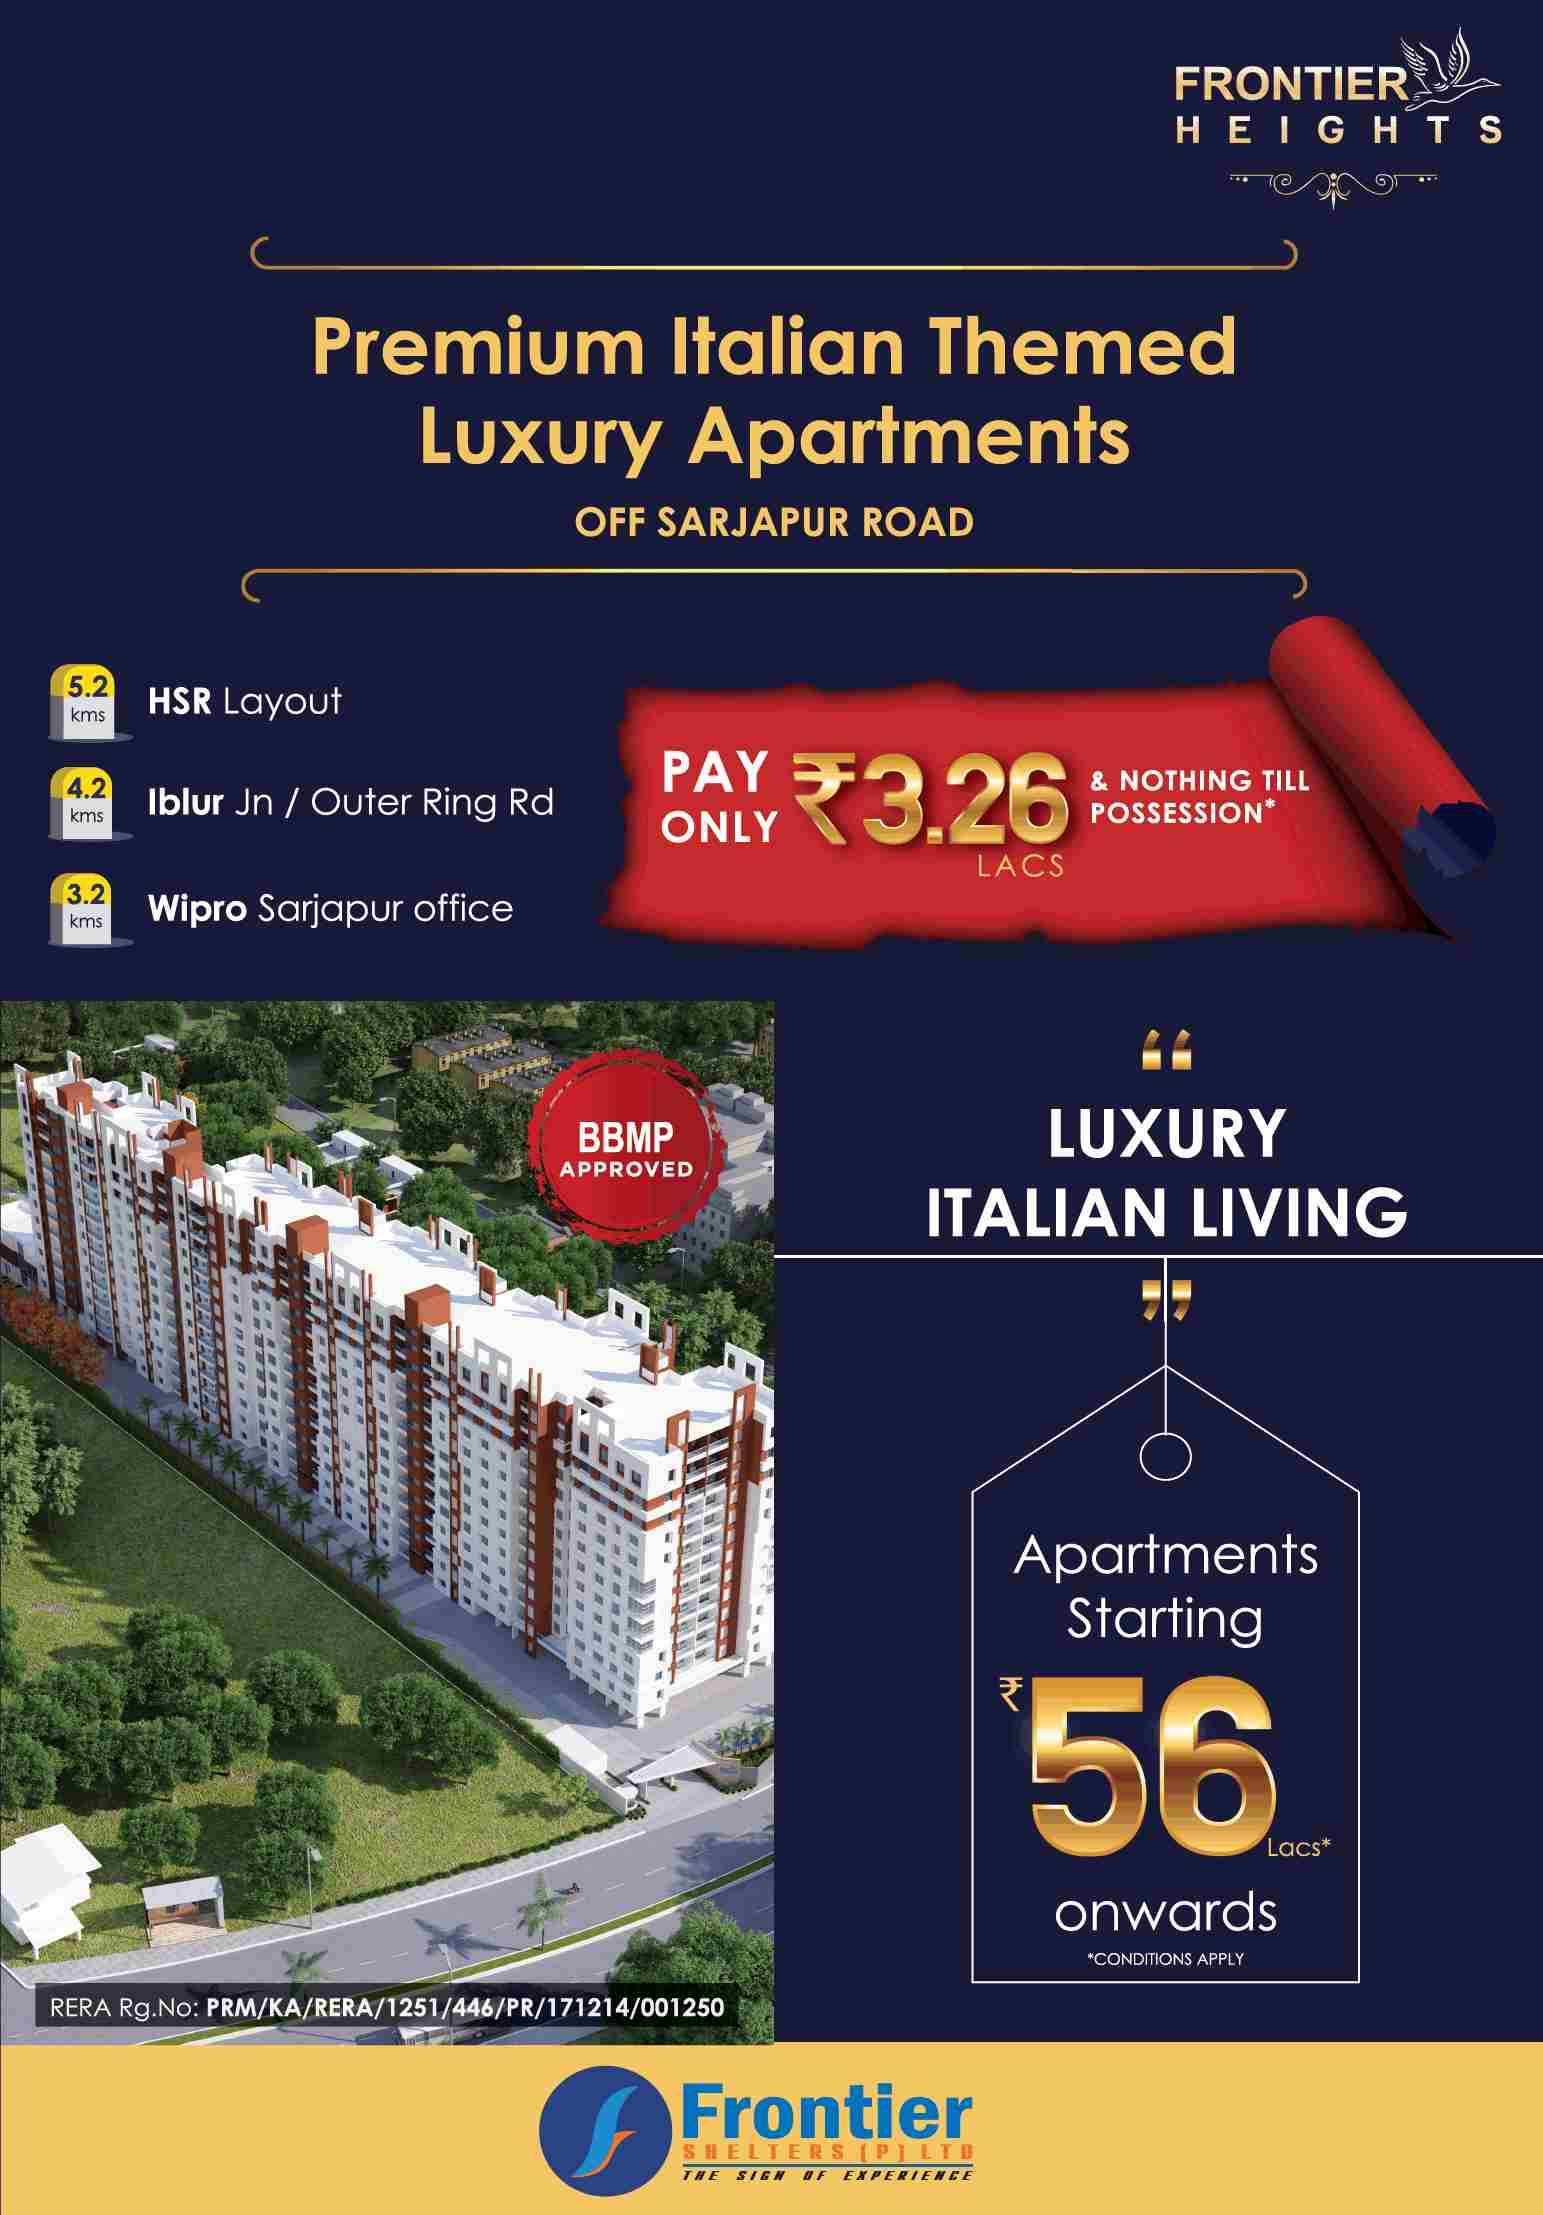 Pay Rs 3.26 Lacs & nothing till possession at Frontier Heights in Bangalore